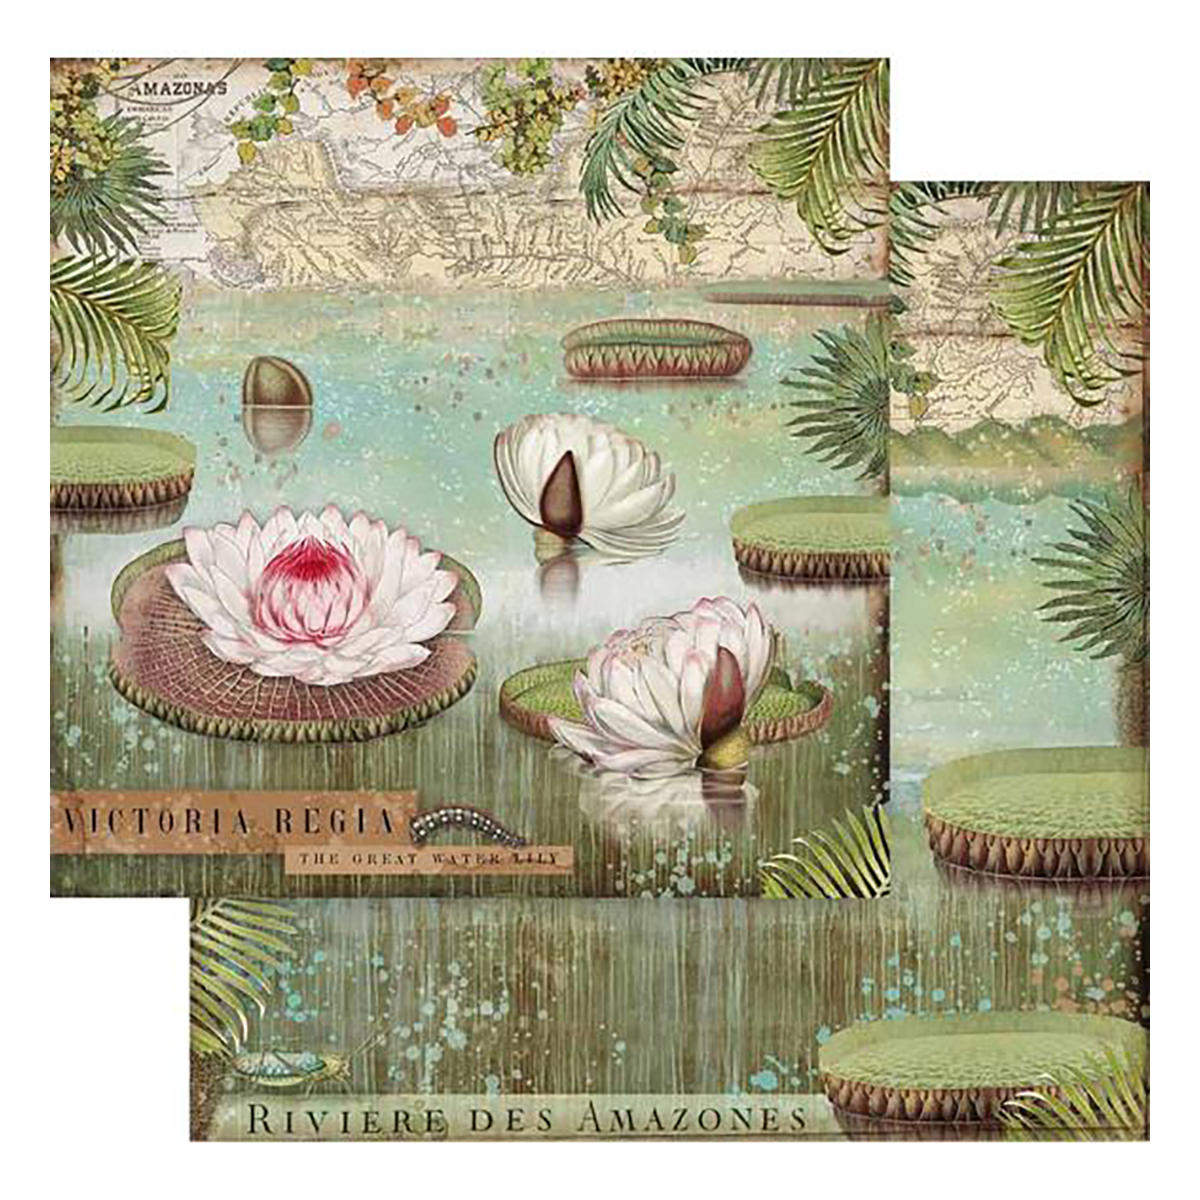 Stamperia Scrapbook Paper Sheet, 12x12 - Water Lily, Amazonia